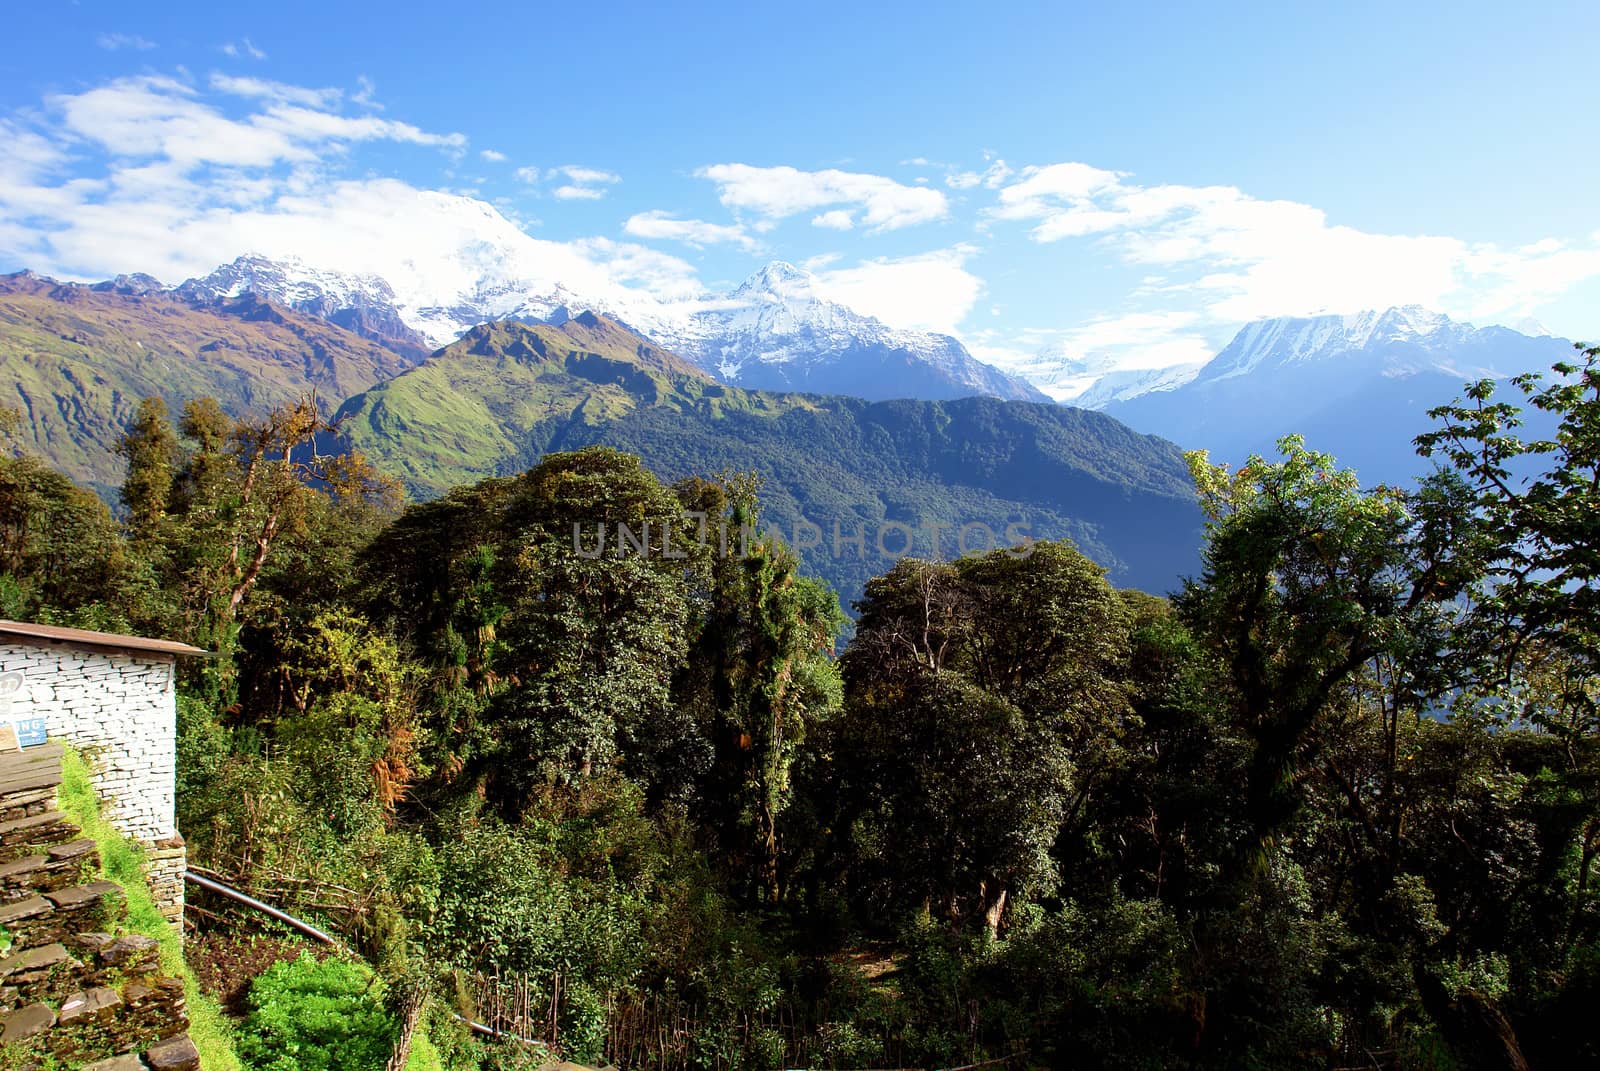 View of "Fish Tail" mountain, trek to base camp Annapurna conser by ptxgarfield